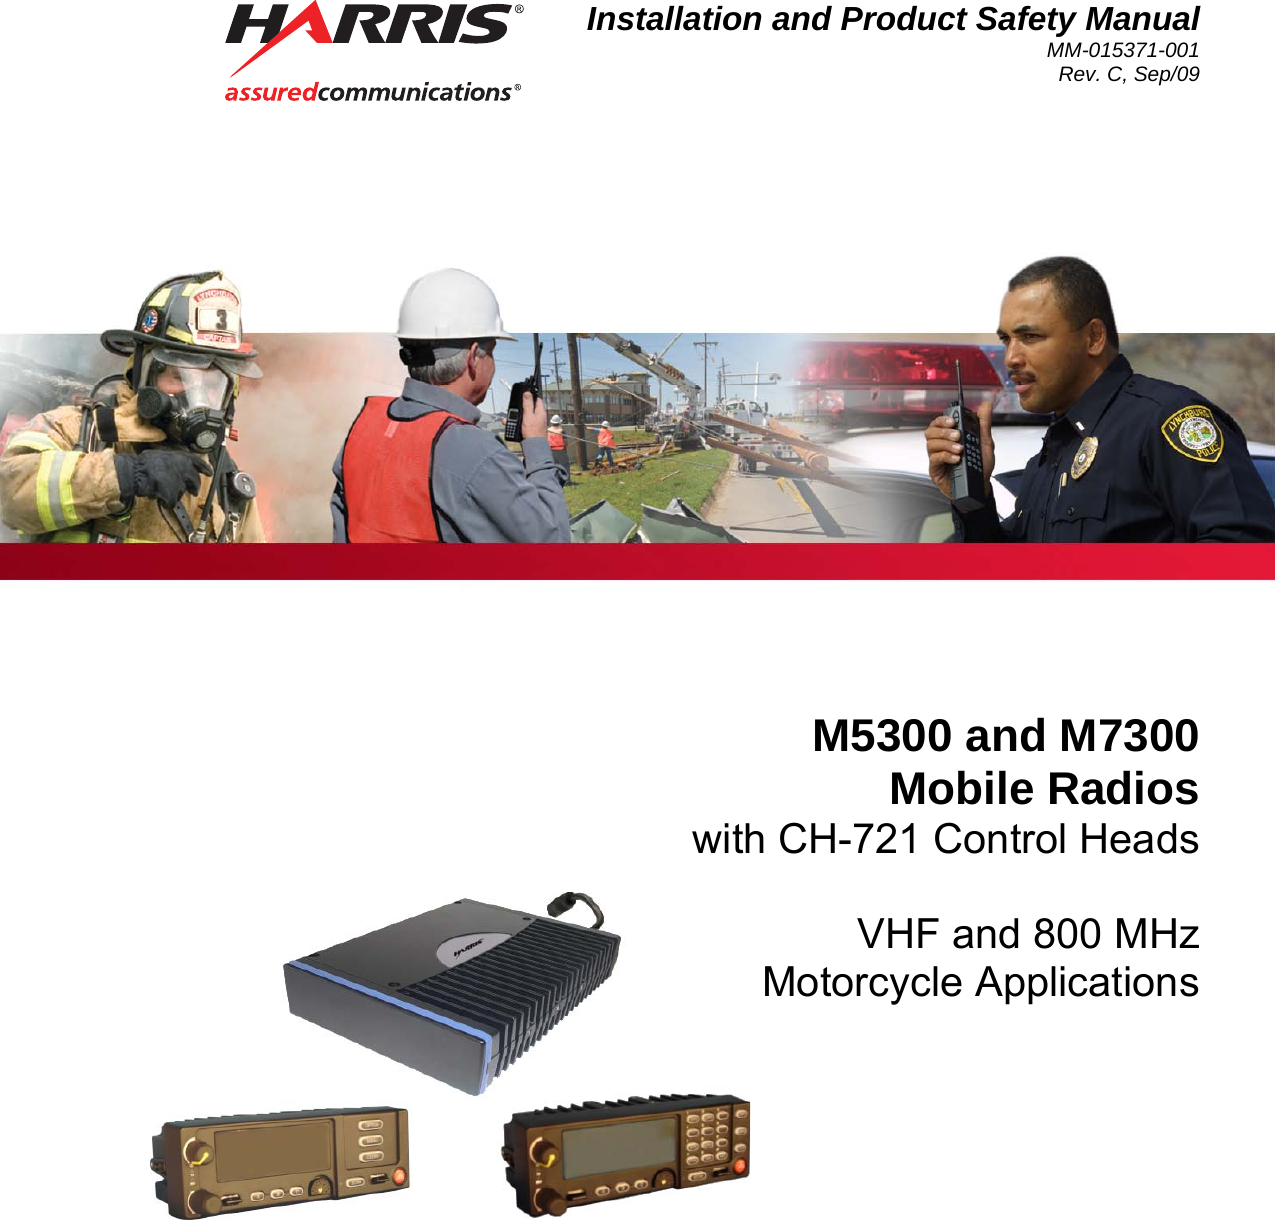 Installation and Product Safety Manual MM-015371-001 Rev. C, Sep/09  M5300 and M7300 Mobile Radios with CH-721 Control Heads  VHF and 800 MHz Motorcycle Applications 